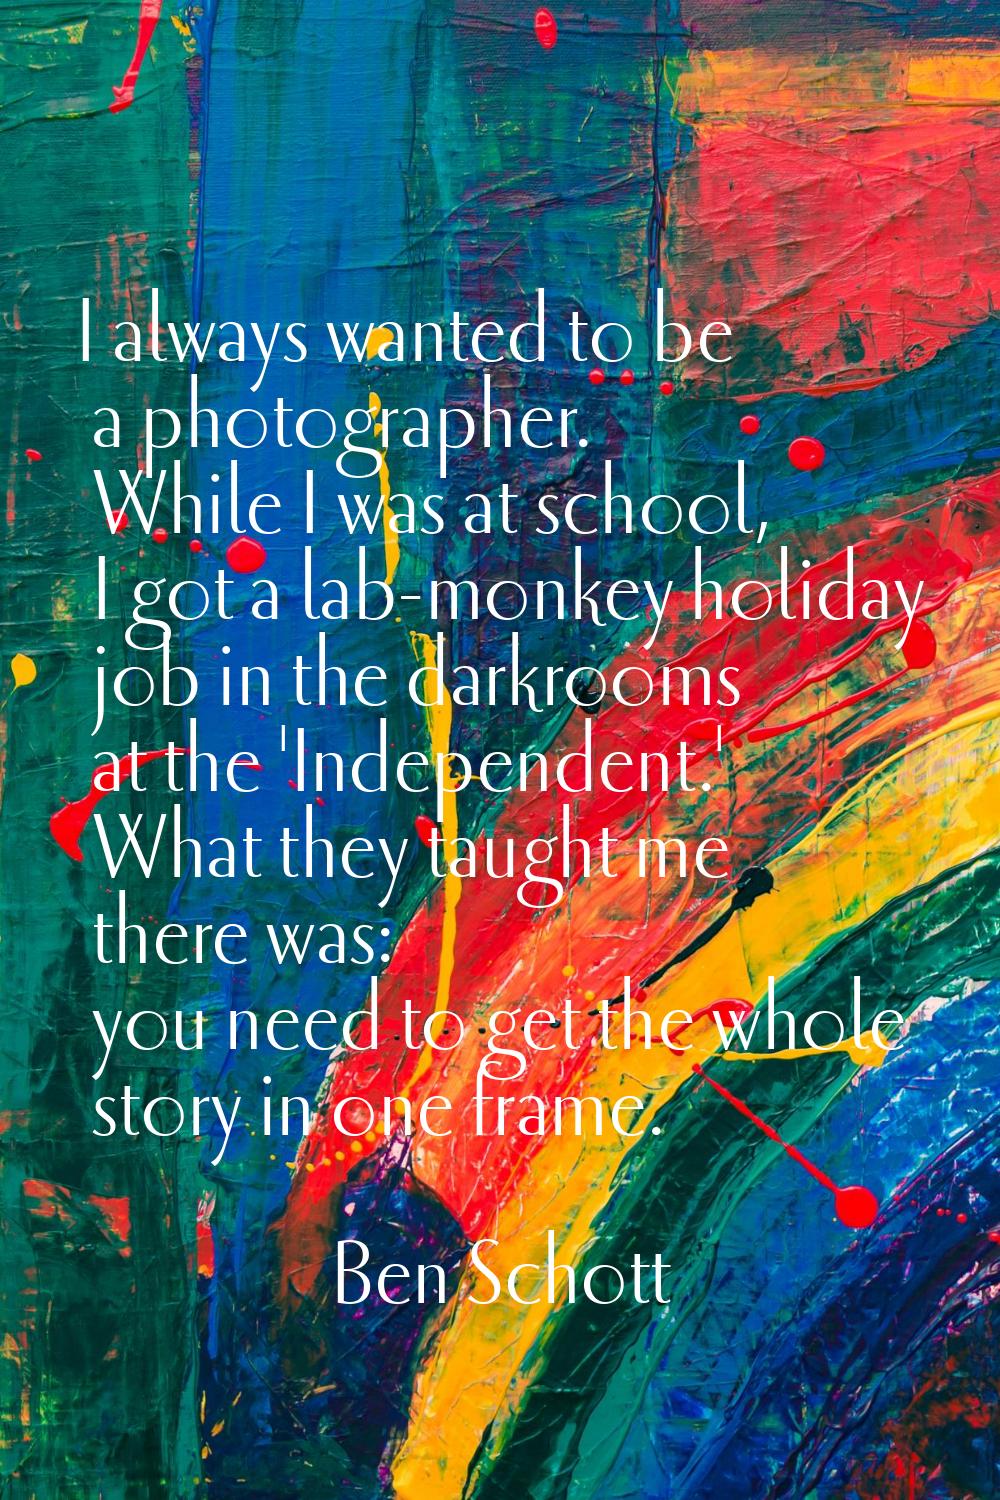 I always wanted to be a photographer. While I was at school, I got a lab-monkey holiday job in the 